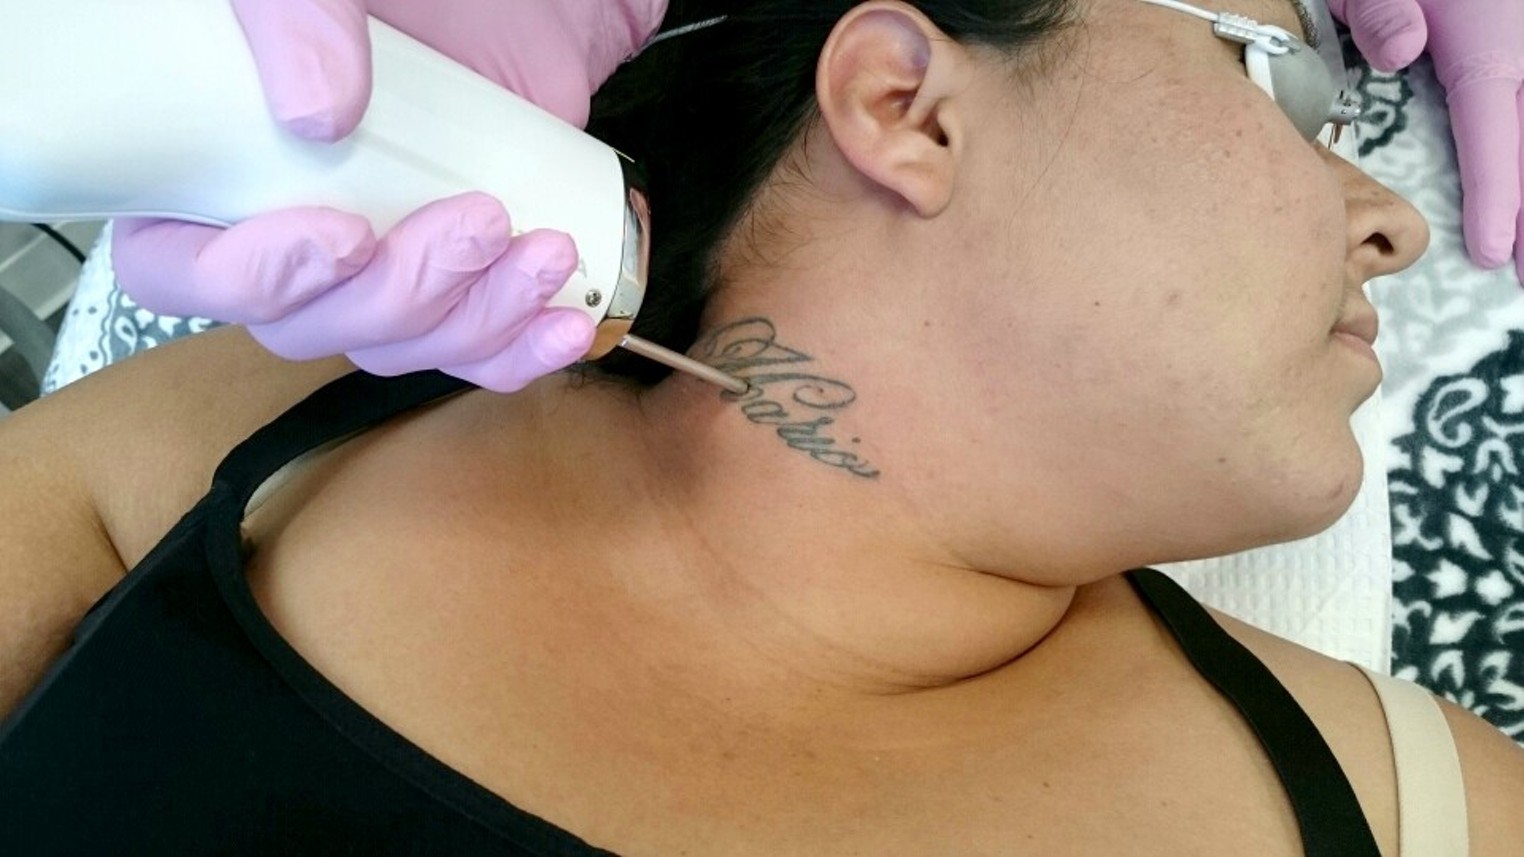 Removery  Before  After Neck Tattoo Removal  Facebook